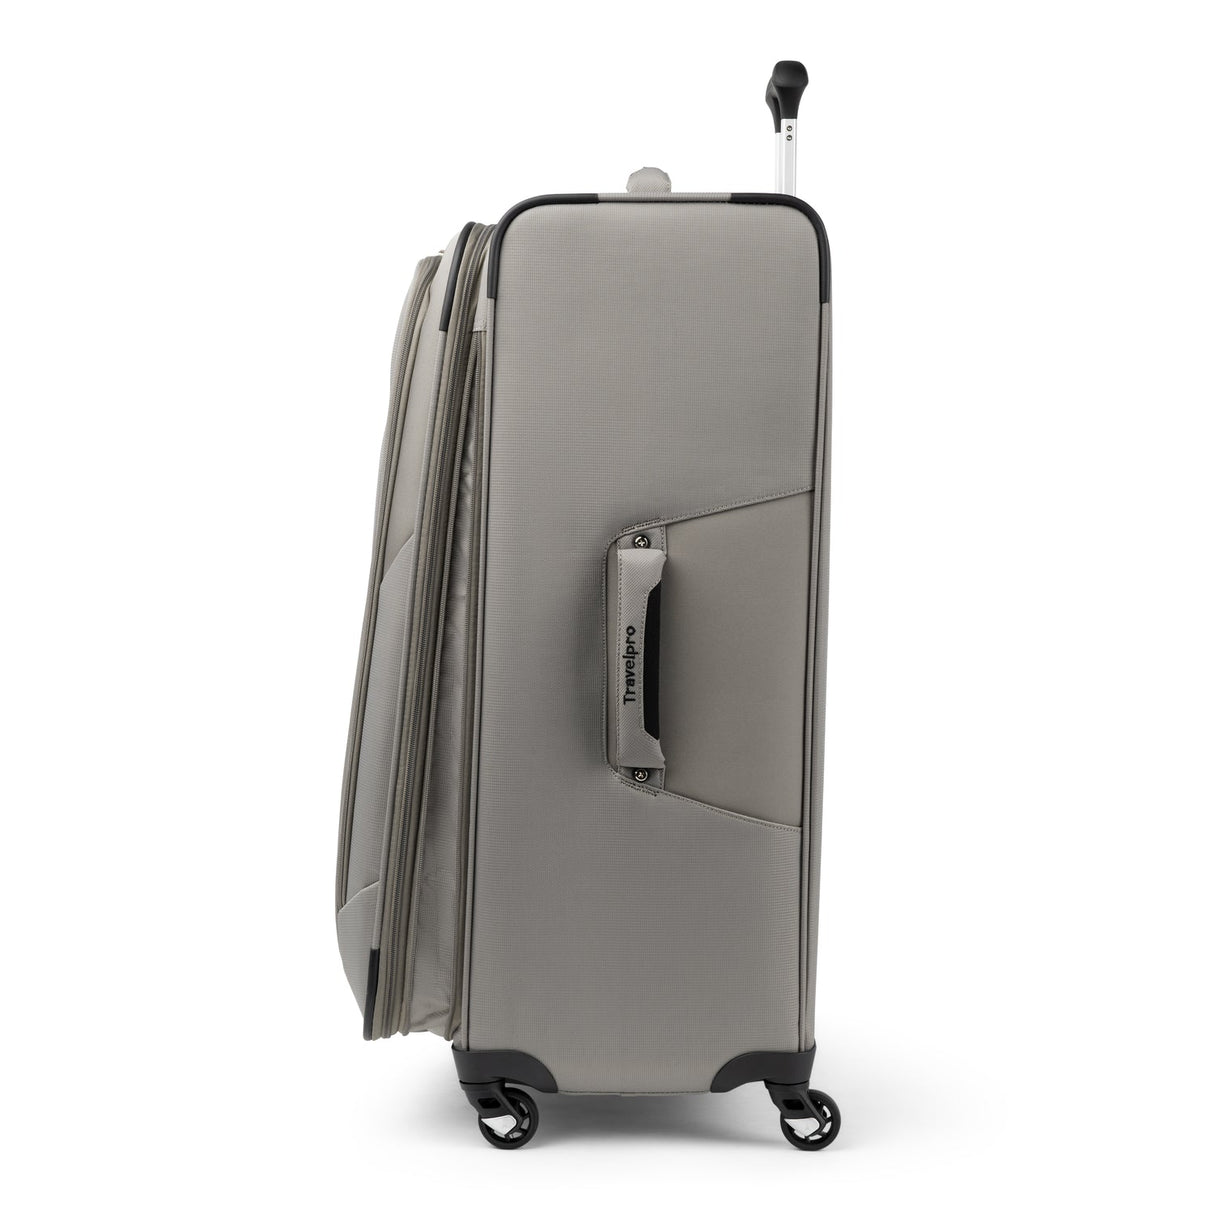 Travelpro Maxlite 5 29" Large Check-In Expandable Spinner , , 401176935_side2-1500x1500-f3a2c67_1024x1024_2x_2fefb99d-4394-4ffb-8d0e-c54a3897ae76